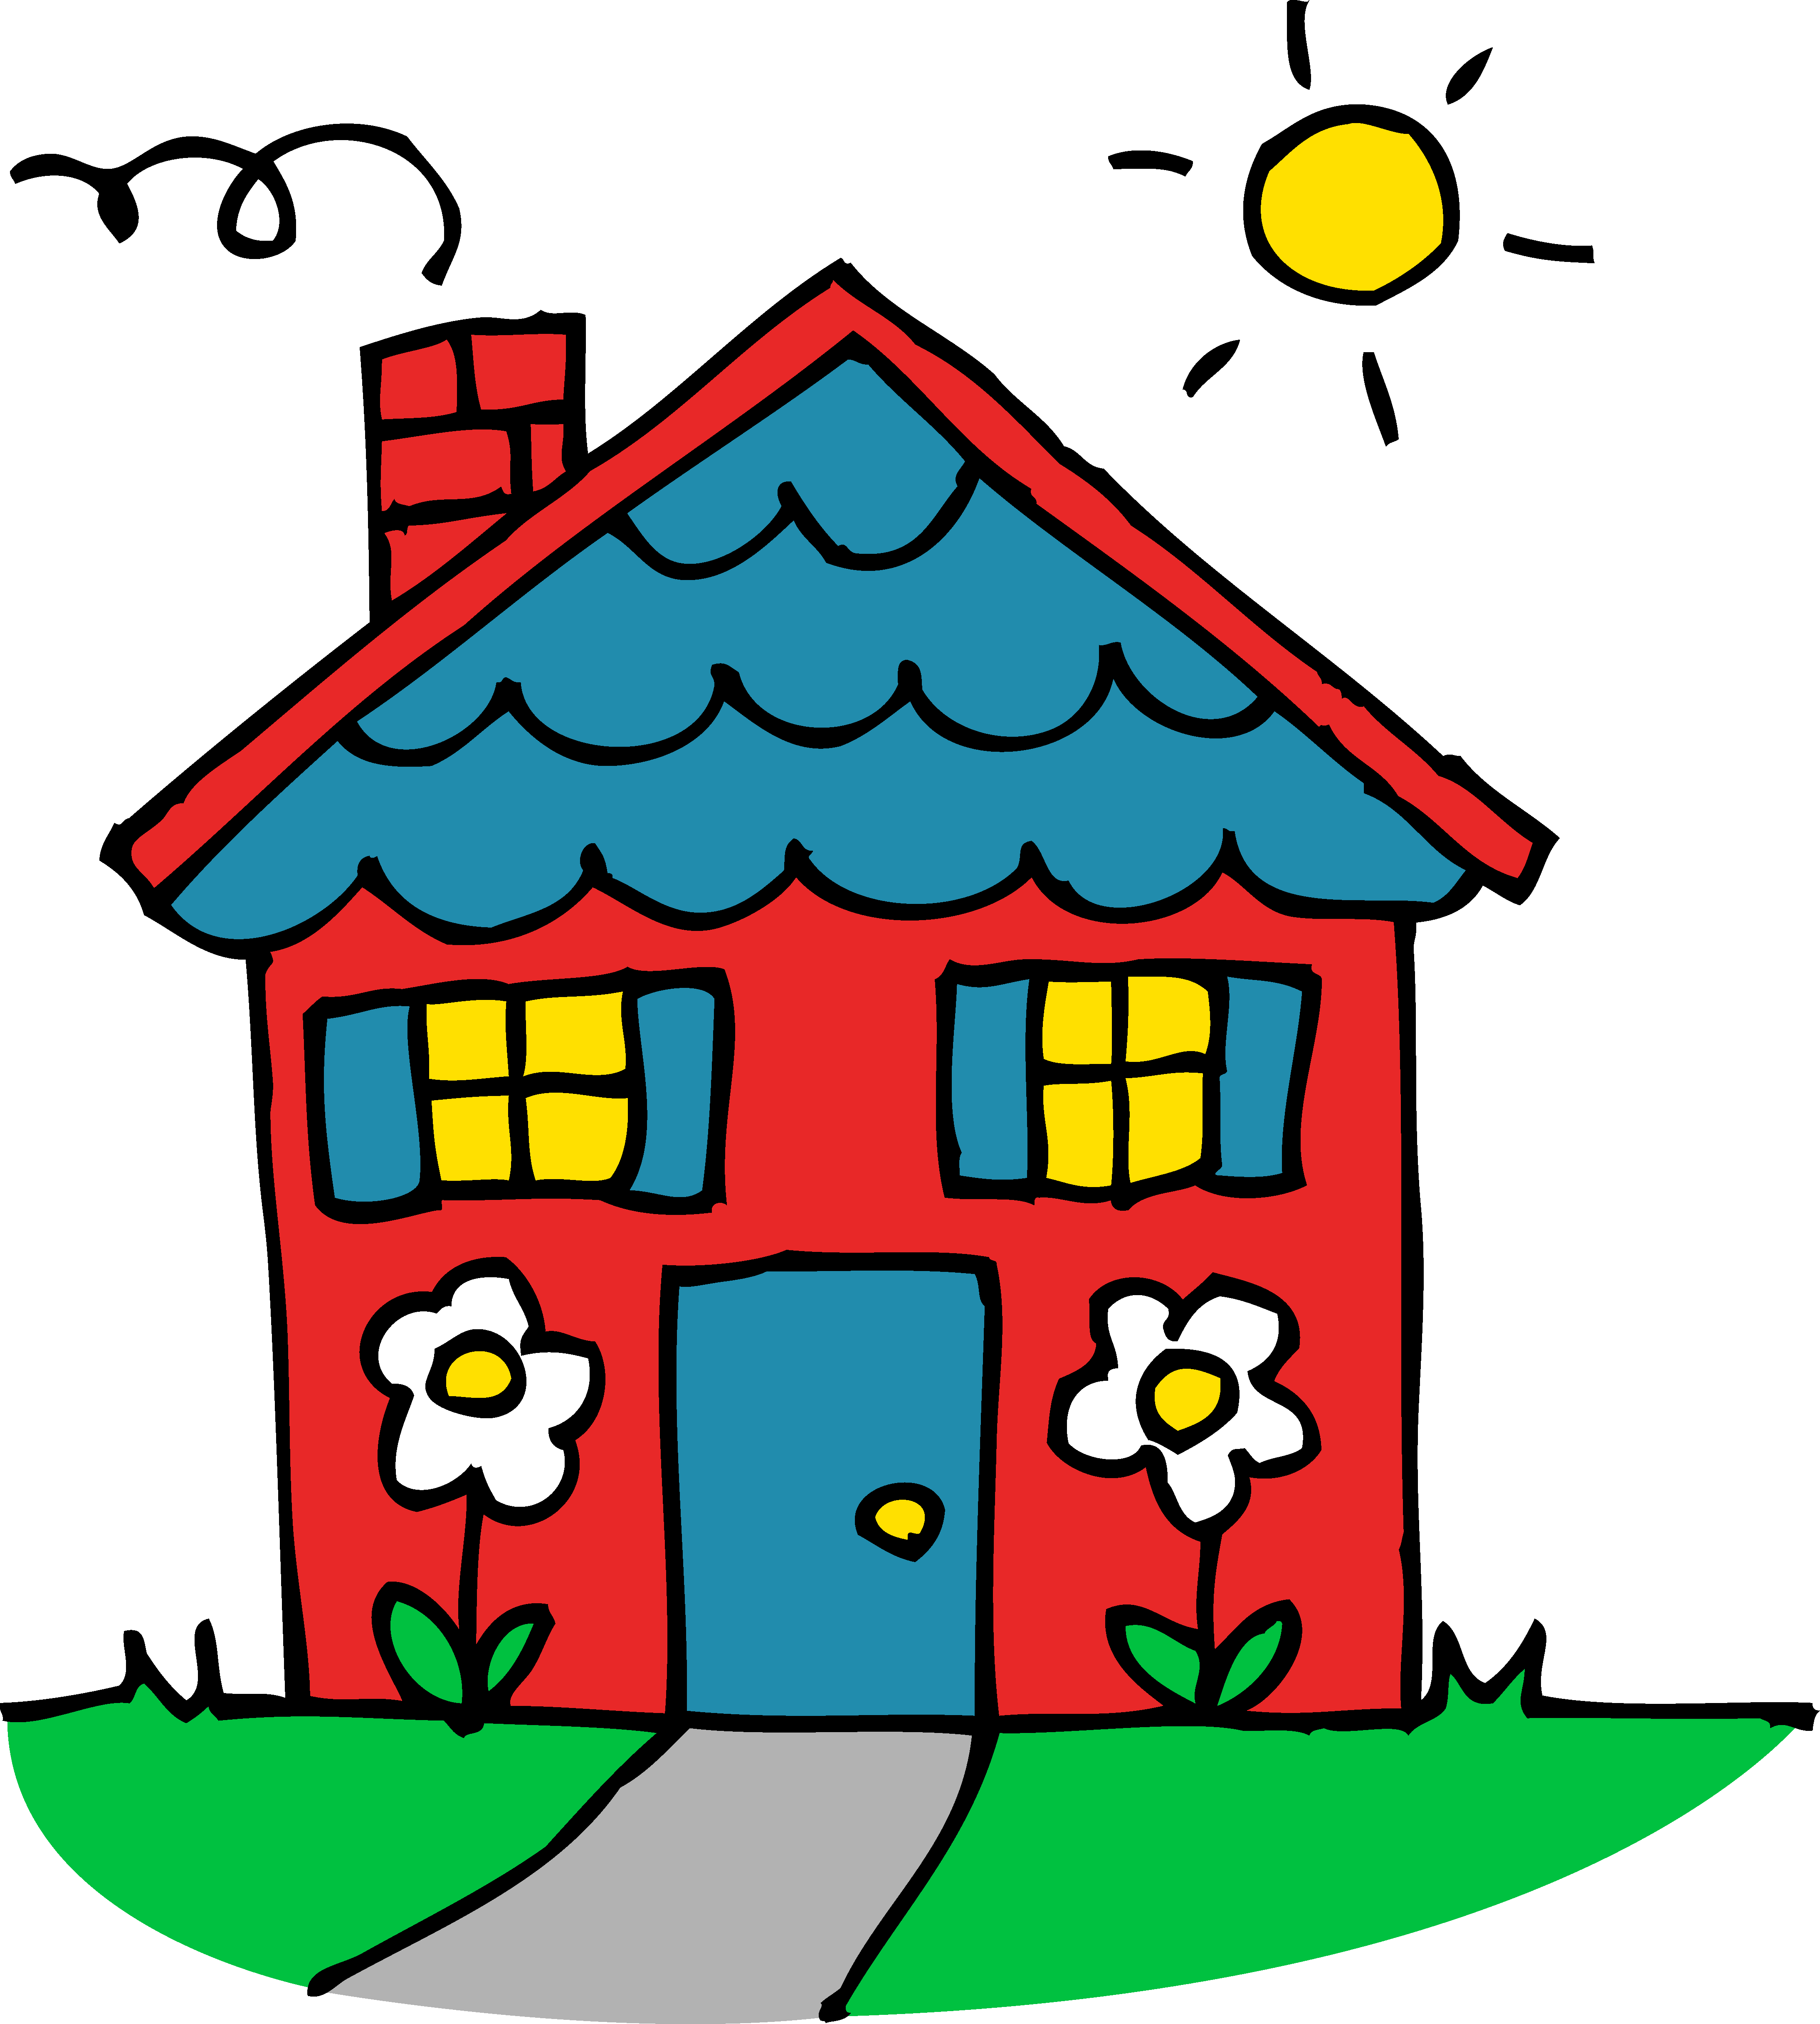 sold home clipart - photo #37